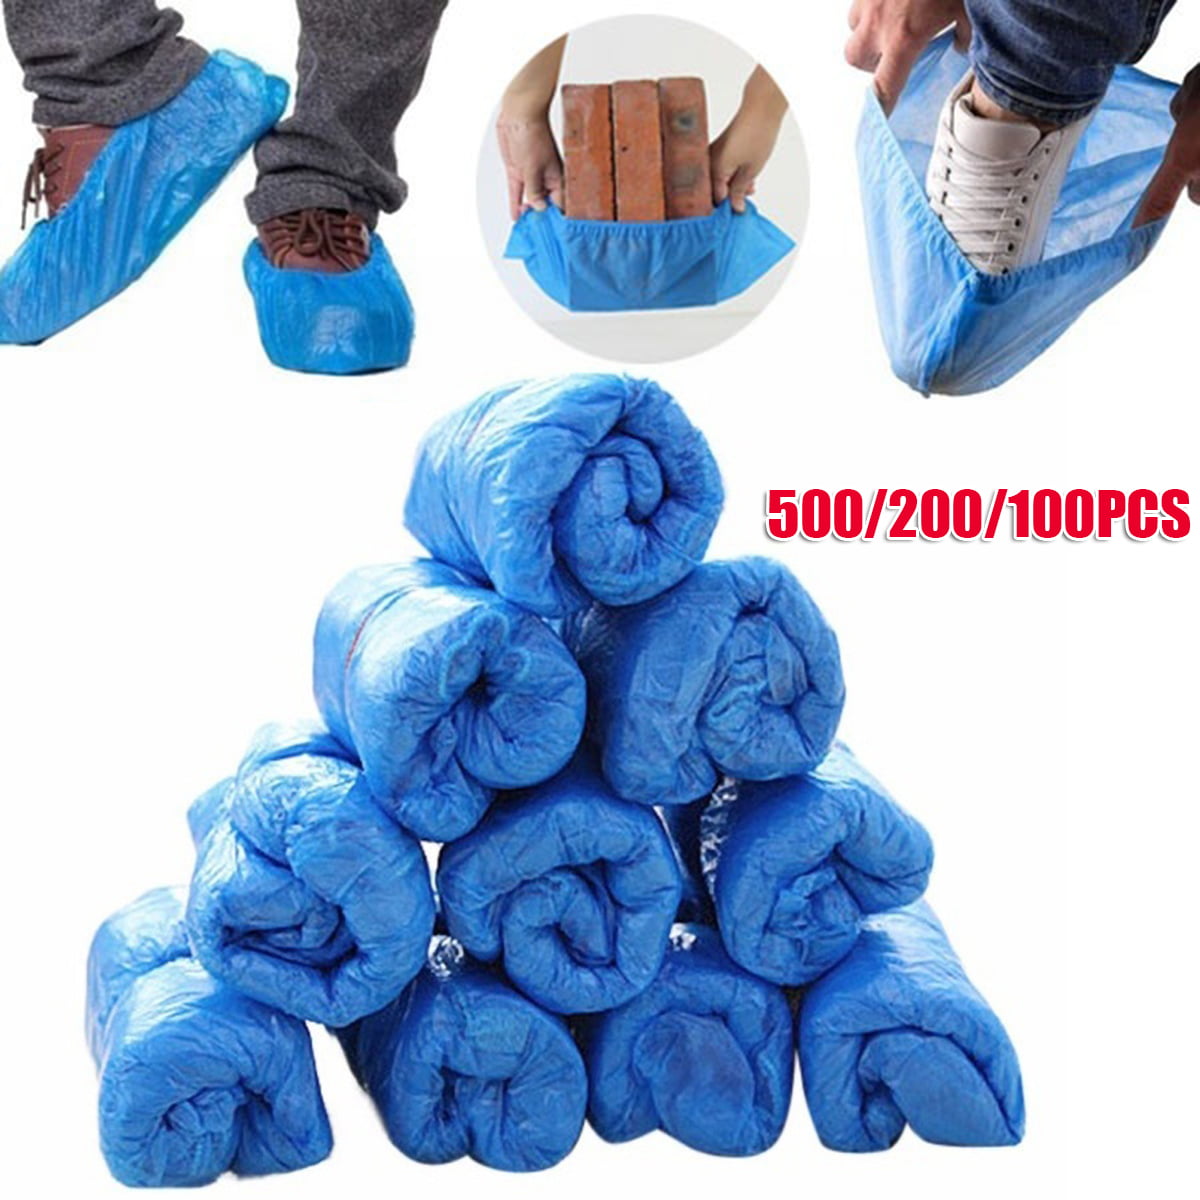 500 Pairs Plastic Disposable Shoe Boot Cover Carpet Floor Protection Cleaning 